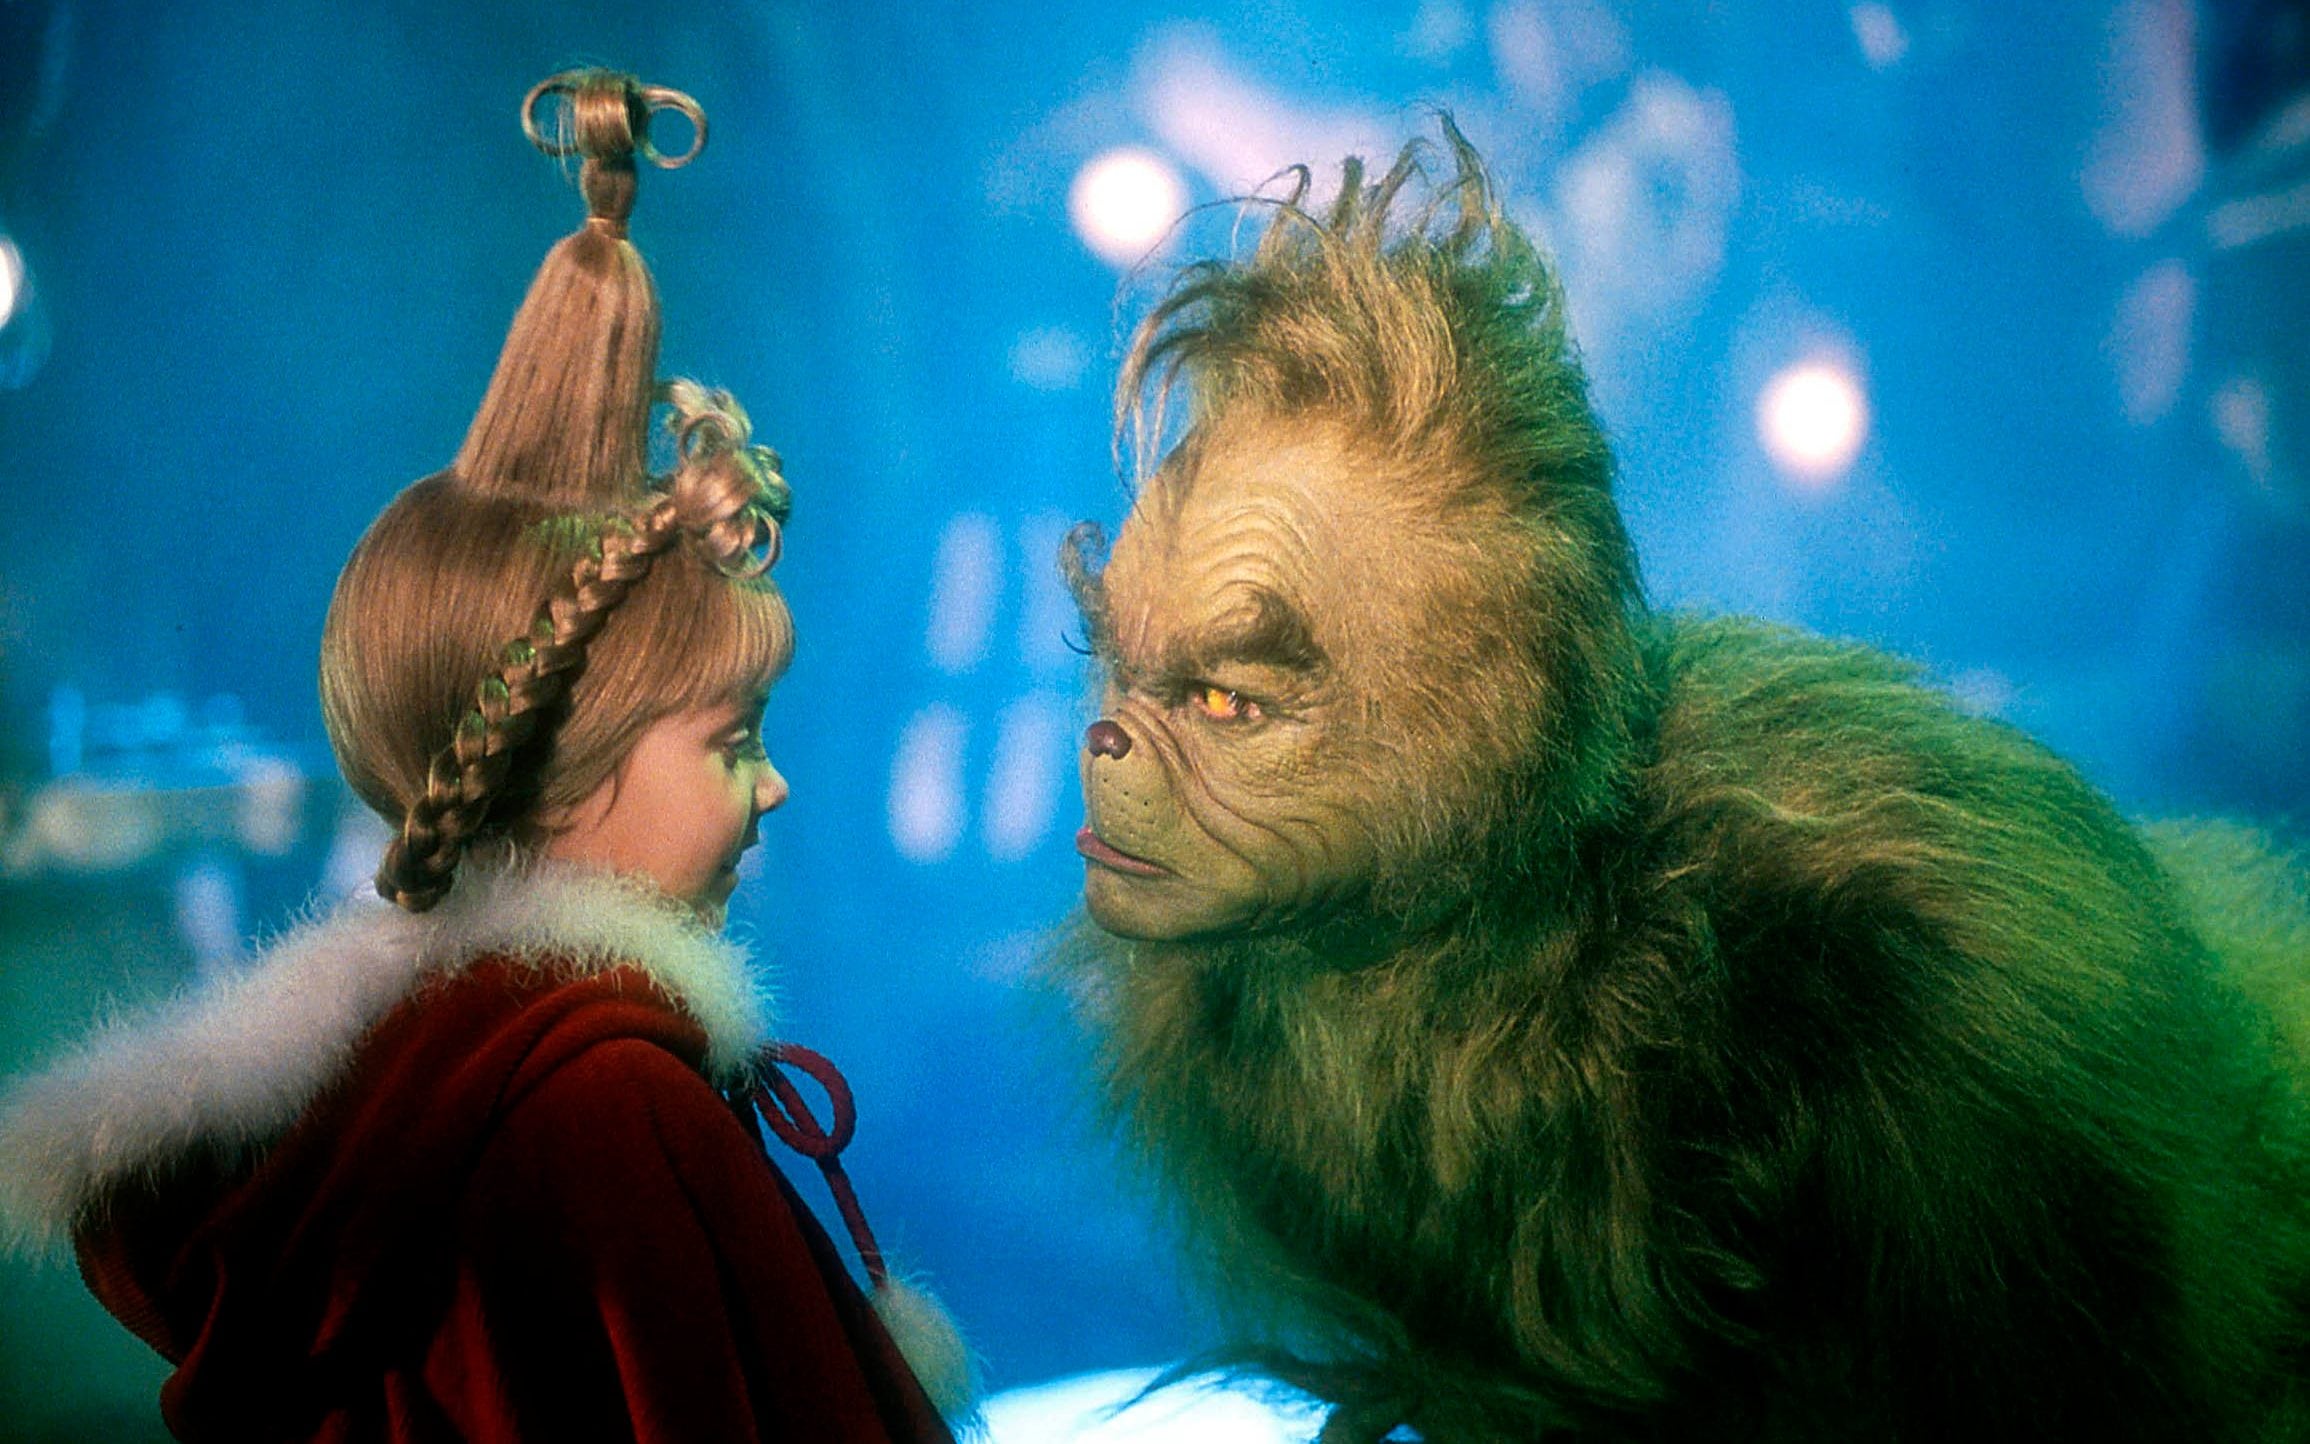 Watching Christmas films and realized the Grinch is an anime character :  r/Animemes